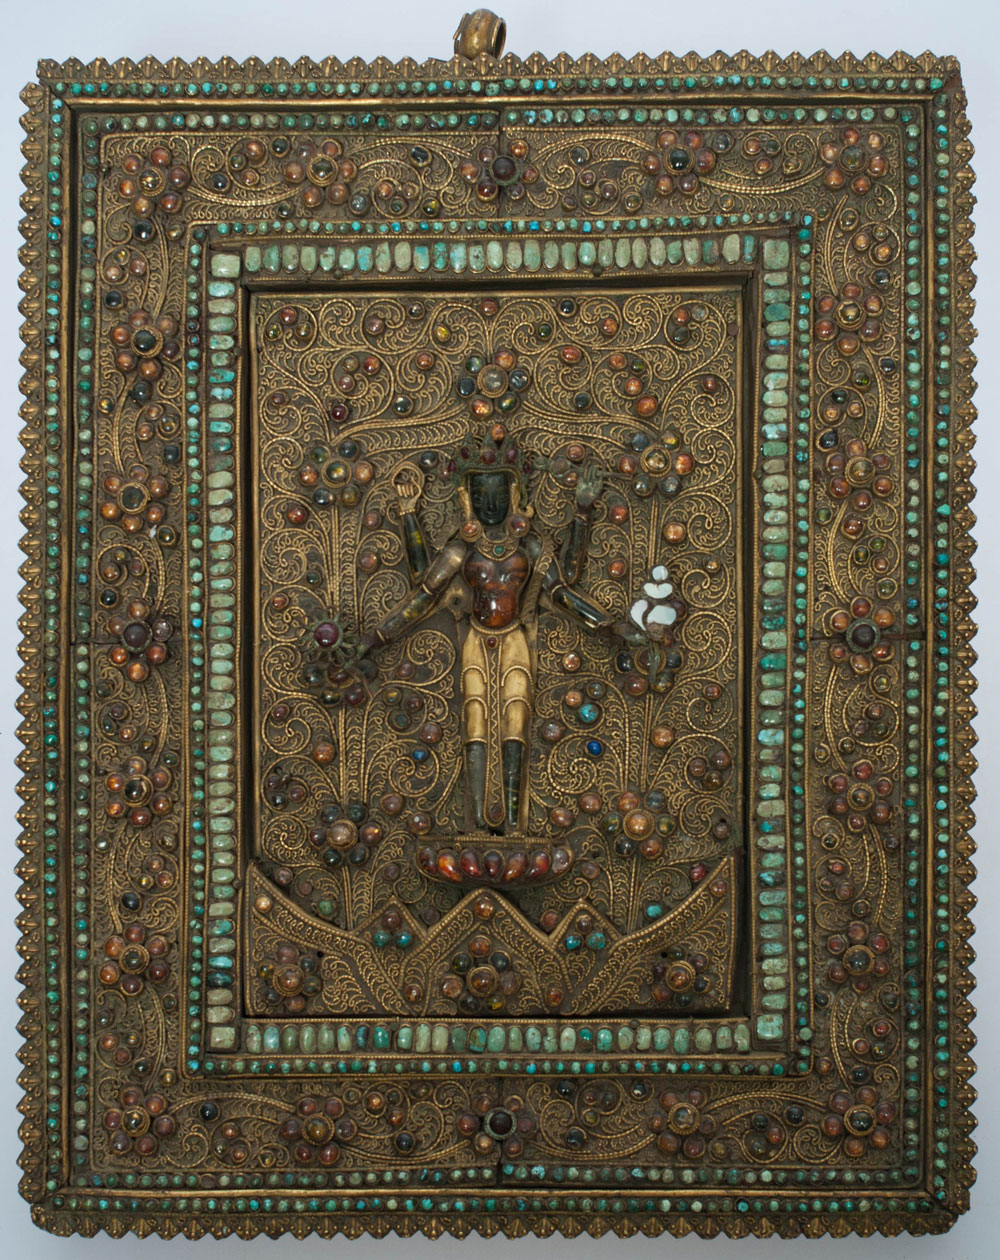  Bohemian National Hall Robyn Buntin of Honolulu Nepalese Vishnu Plaque, 18th-19th Century, 14-1/4" x 11-1/2", Gilt bronze, mother of pearl, stones, glass, turquoise